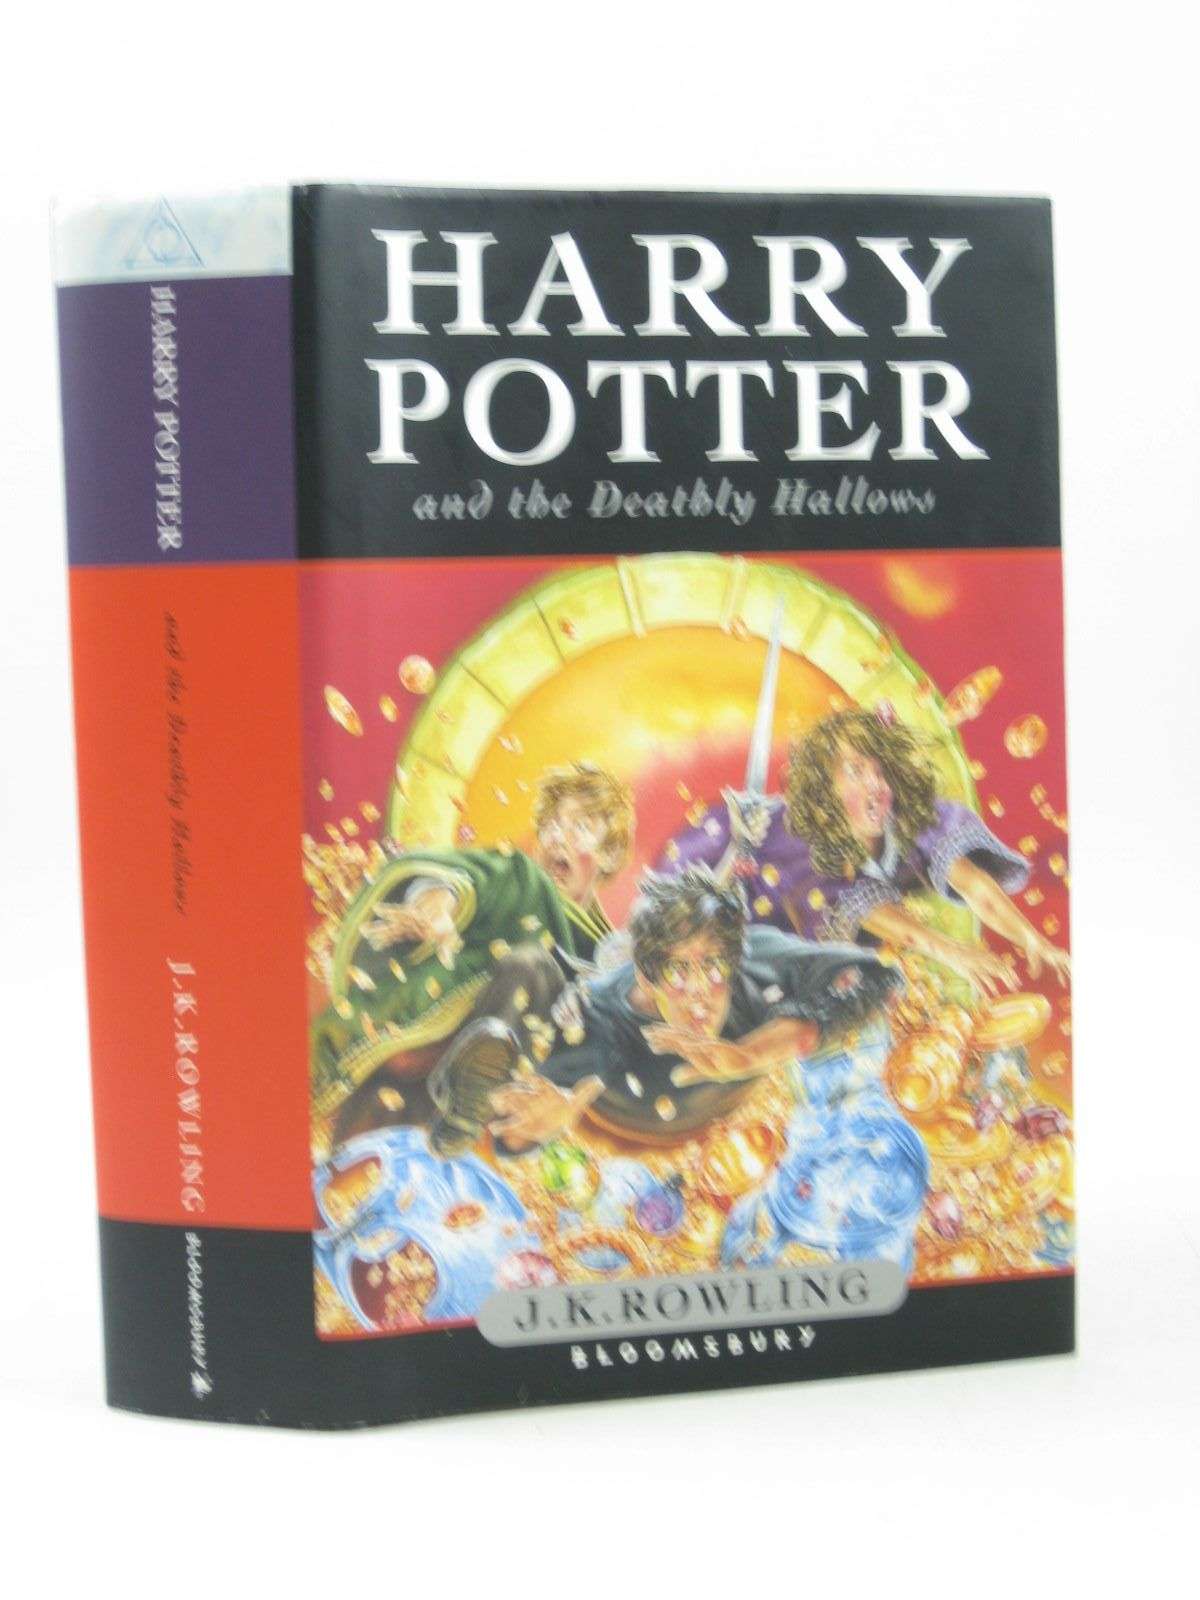 HARRY POTTER AND THE ORDER OF THE PHOENIX written by ...